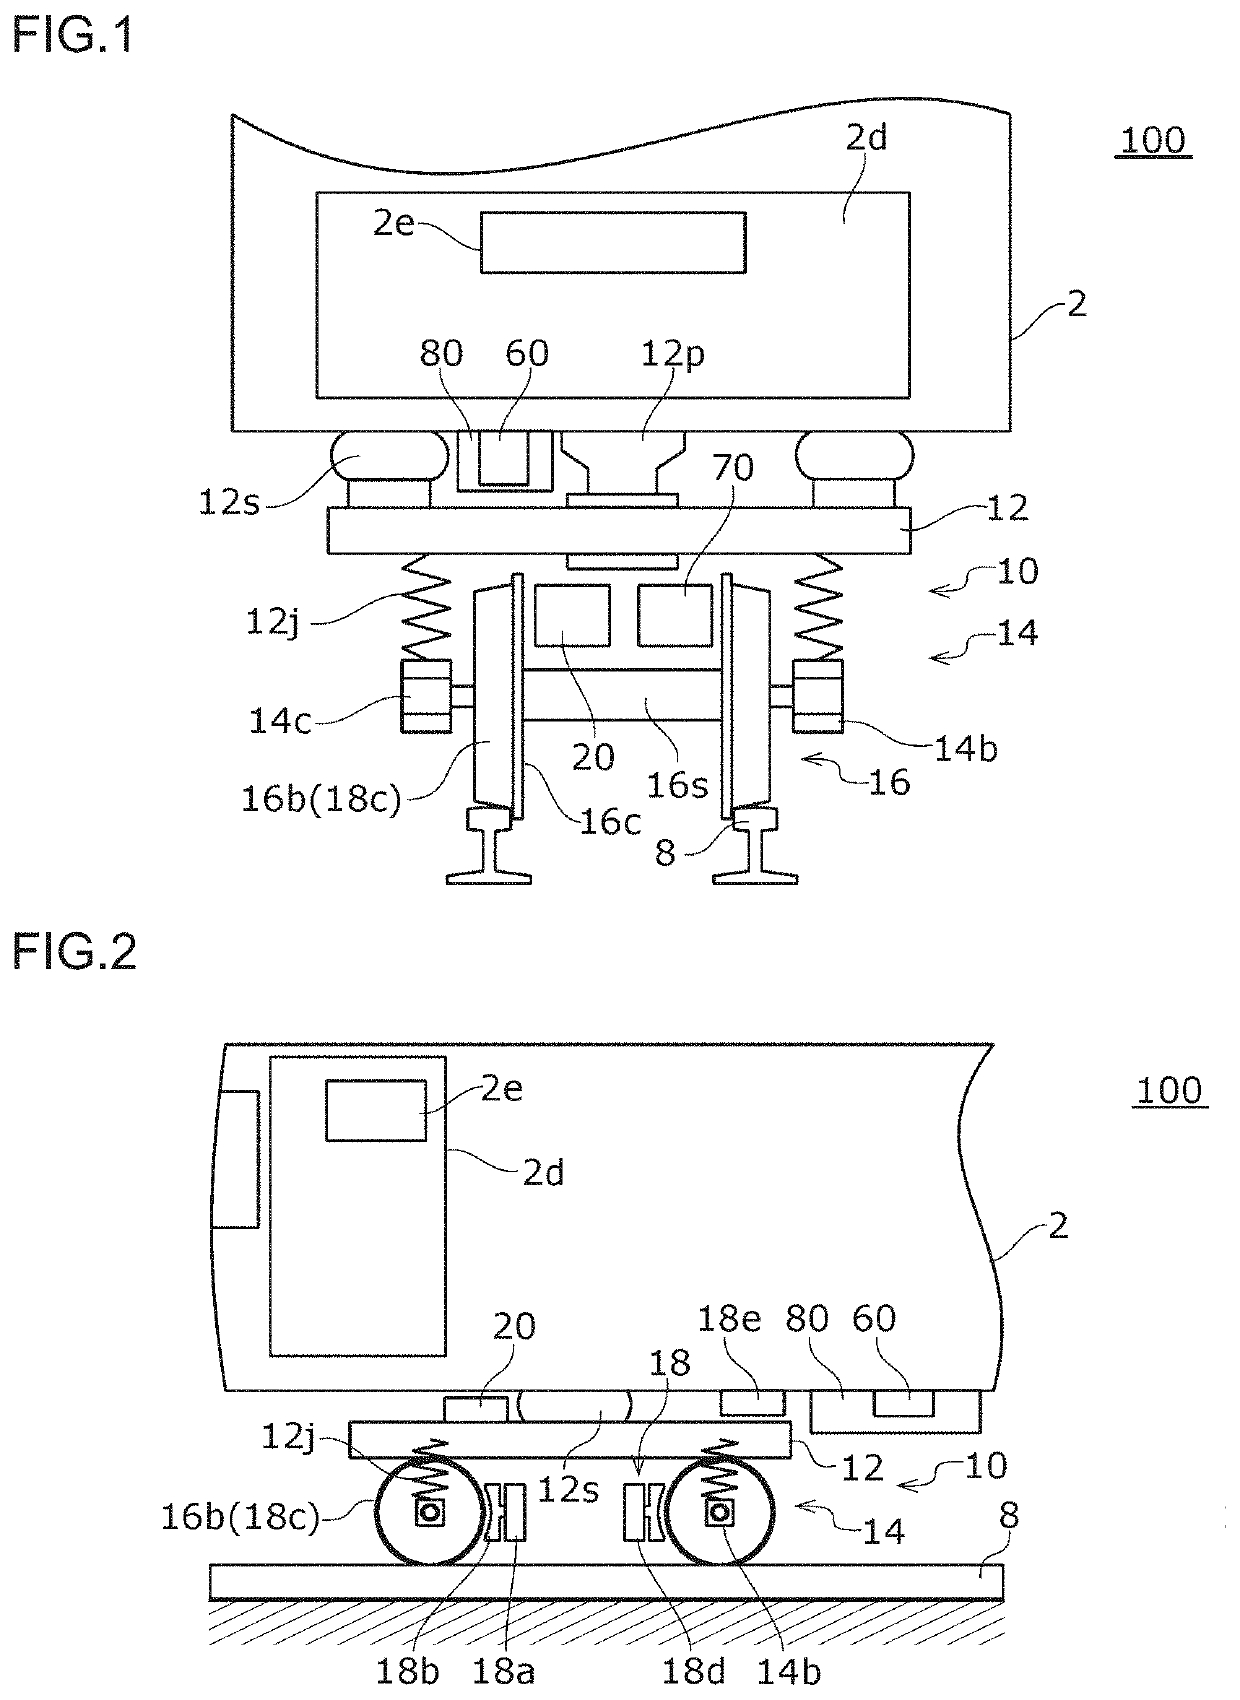 Railway condition monitoring device, railway vehicle bogie, railway vehicle, railway brake control device